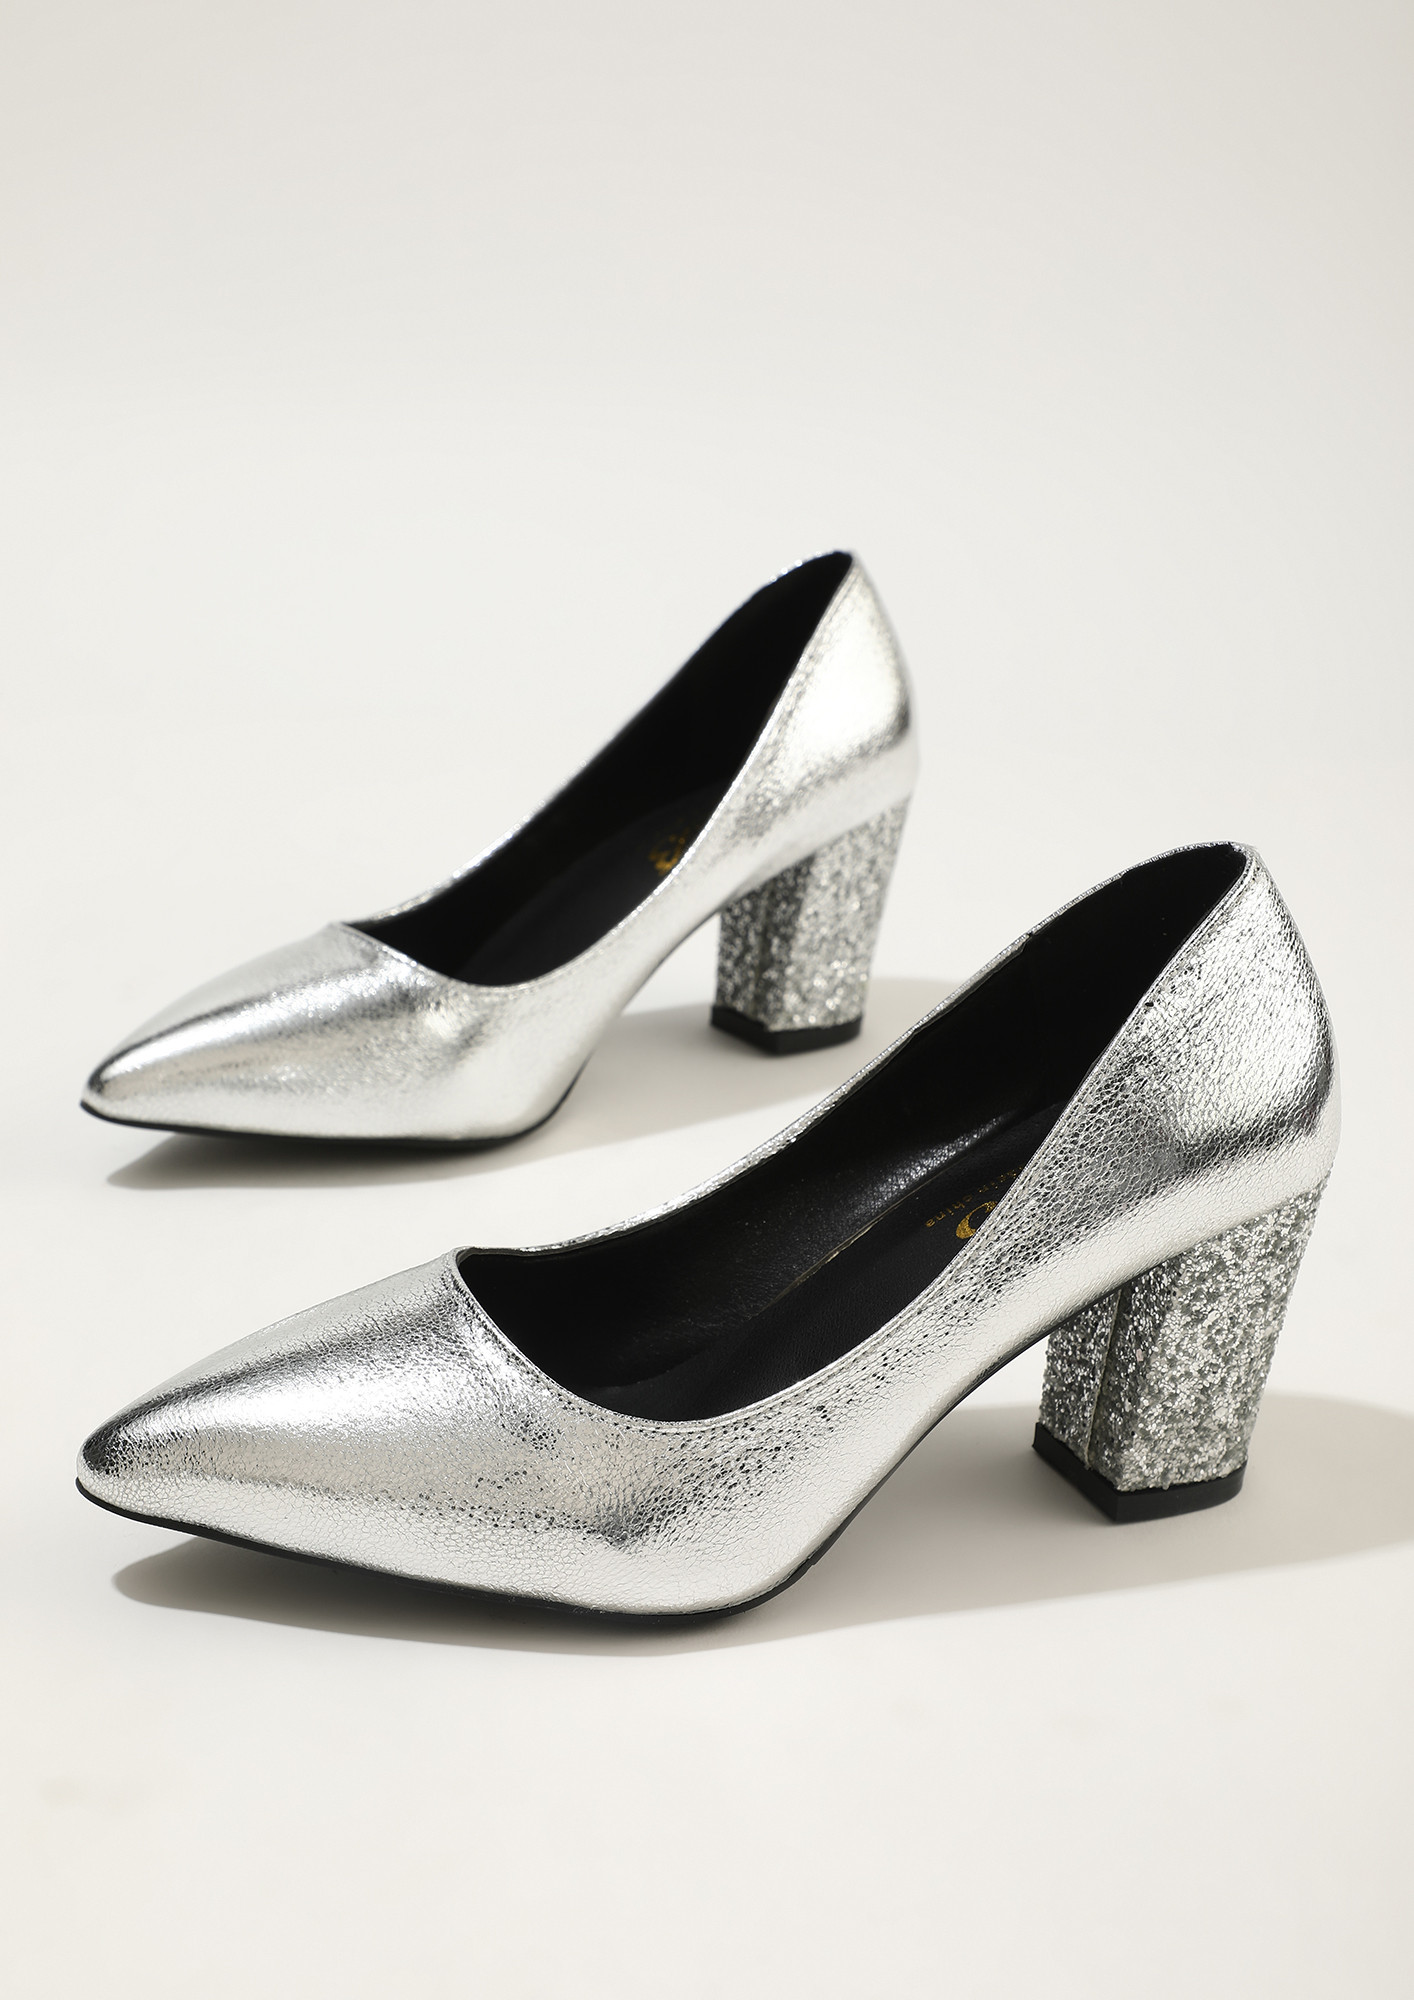 STEP OUT IN SHIMMERING STYLE SILVER PUMPS